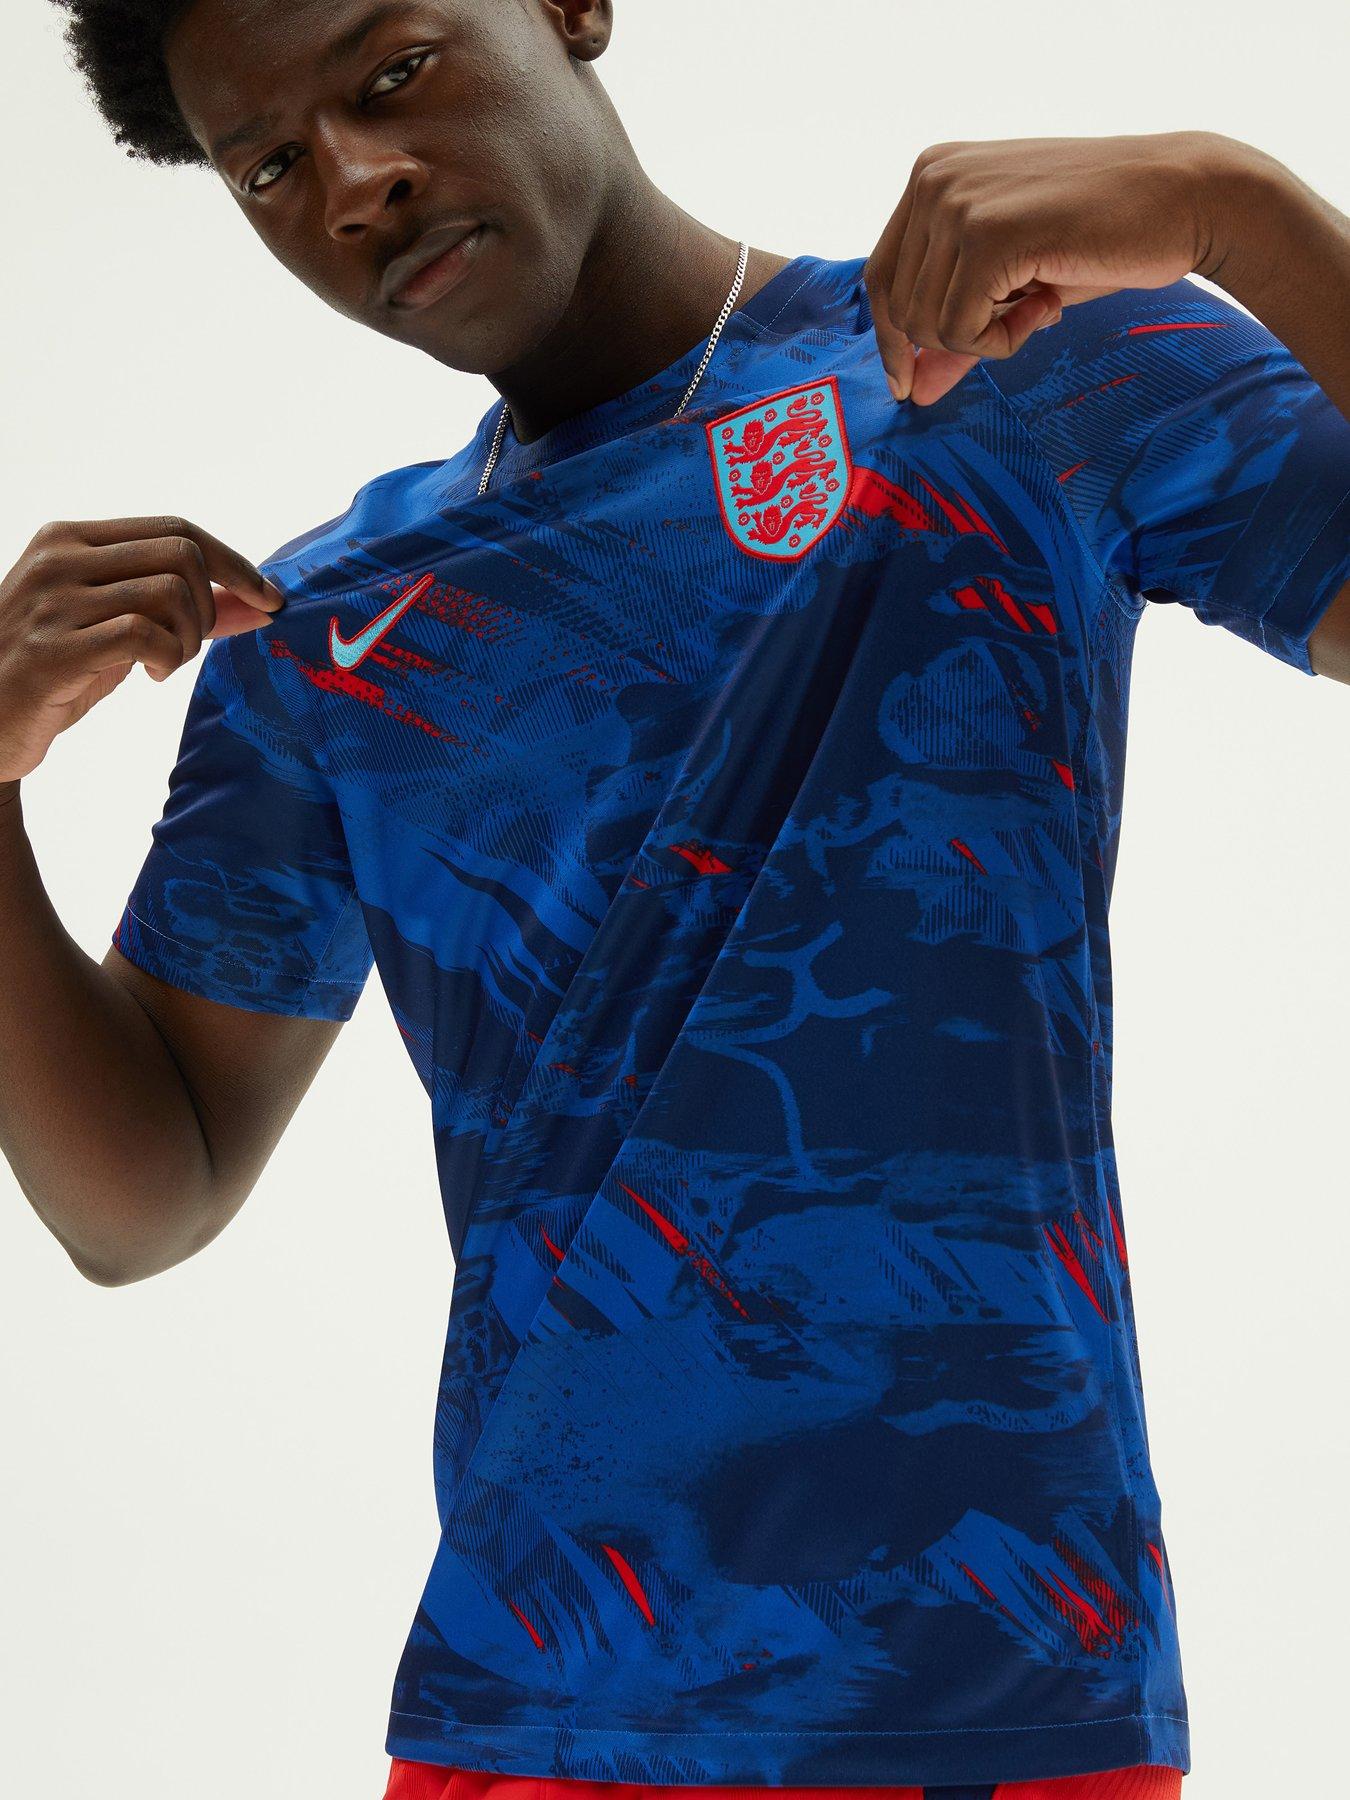 por inadvertencia Medieval Implacable England | Football shirts | Mens sports clothing | Sports & leisure |  www.littlewoods.com